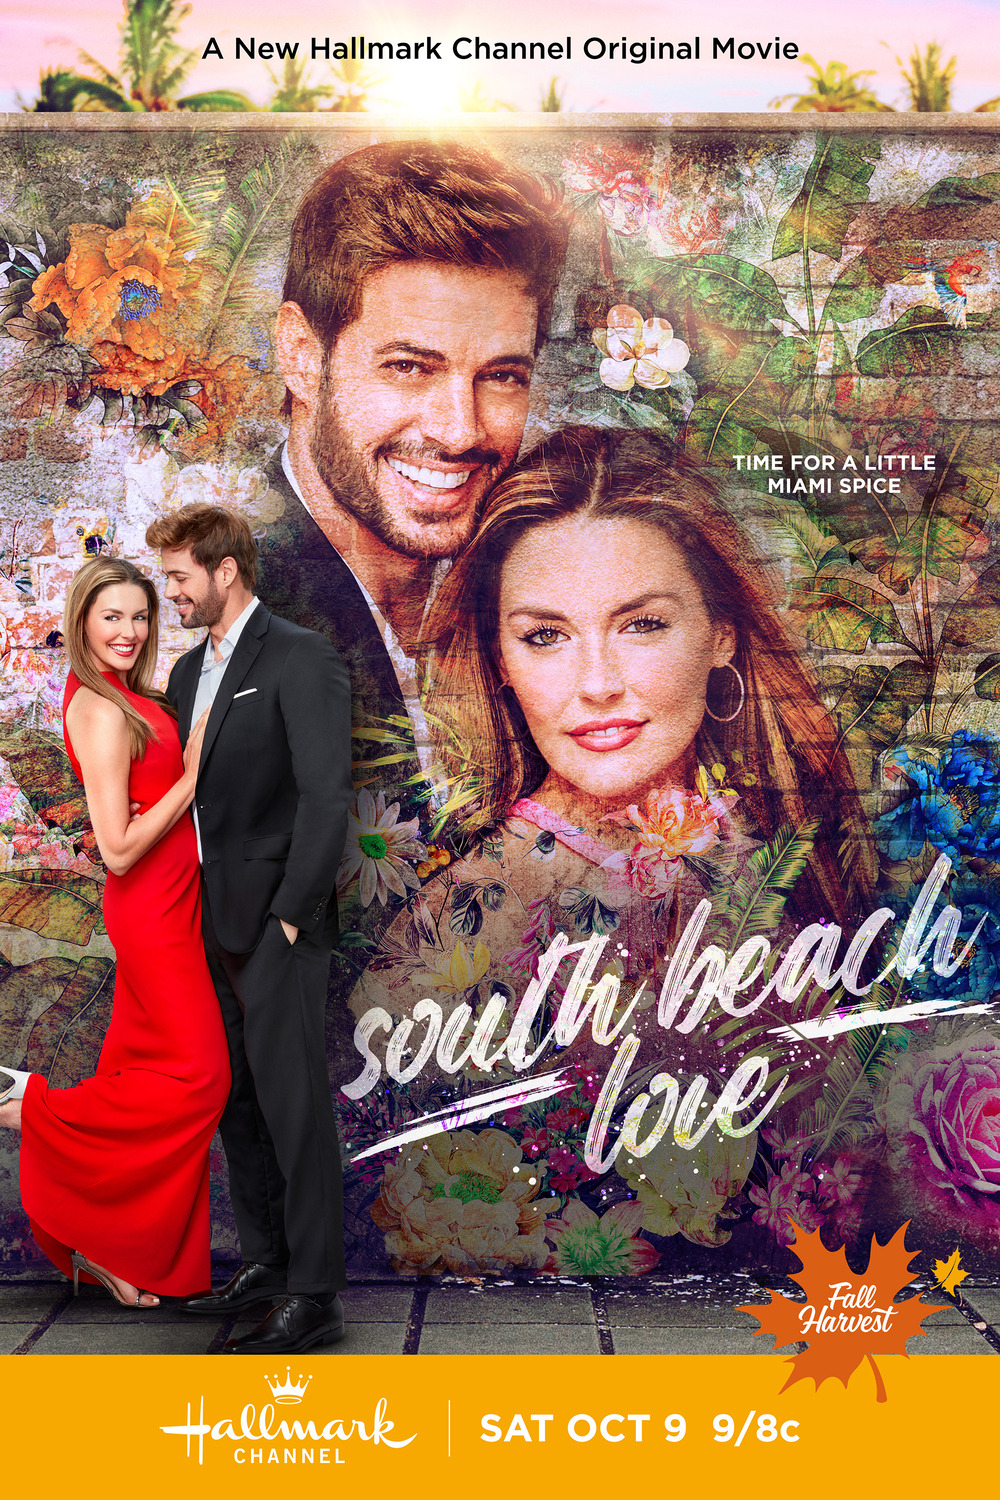 Extra Large TV Poster Image for South Beach Love 